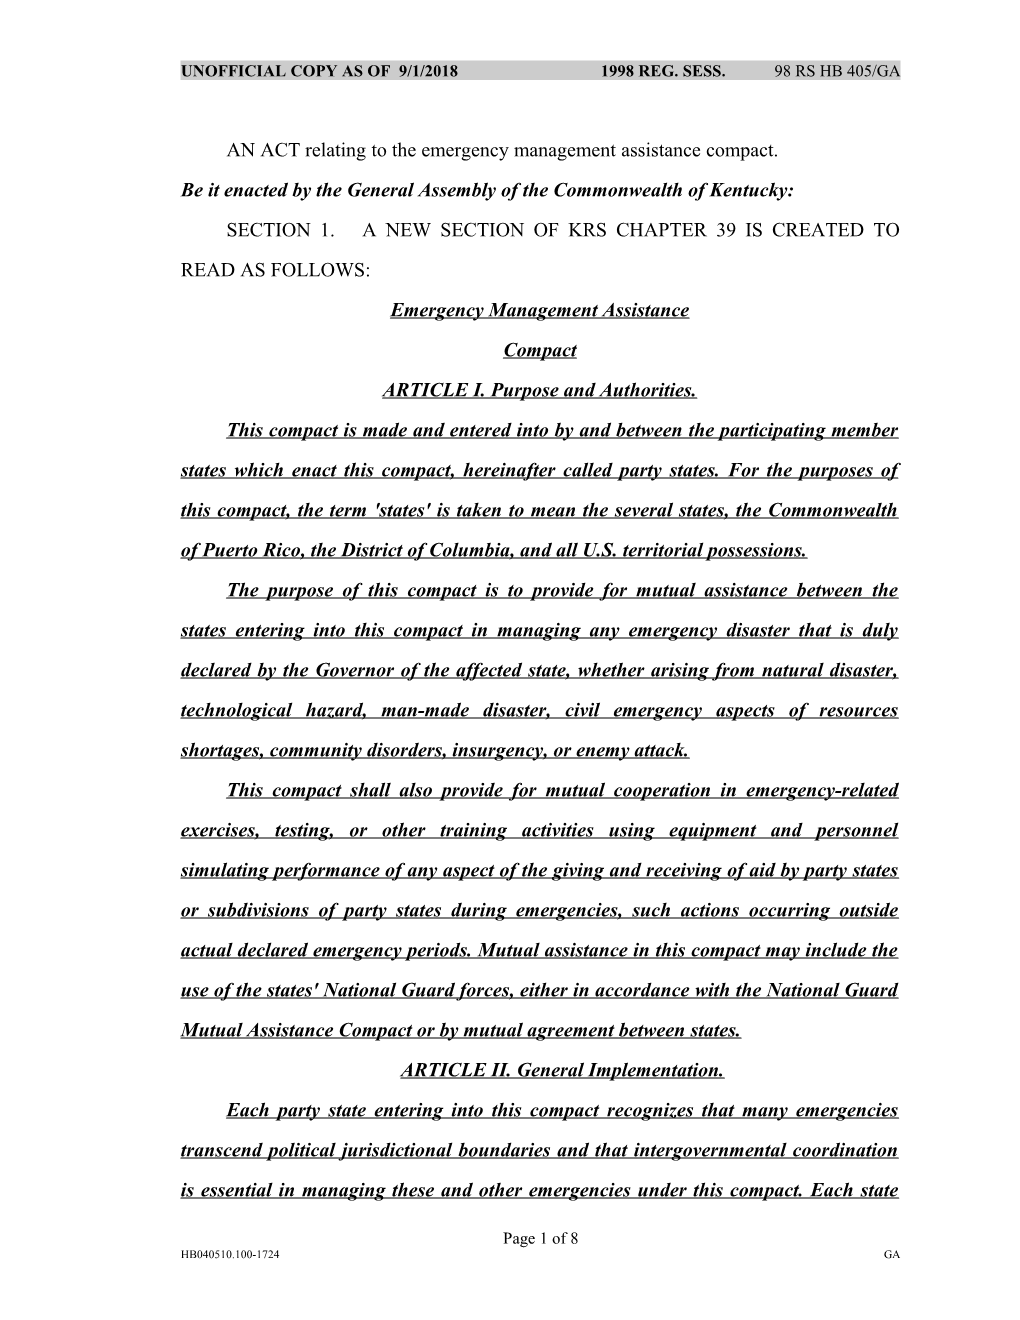 AN ACT Relating to the Emergency Management Assistance Compact